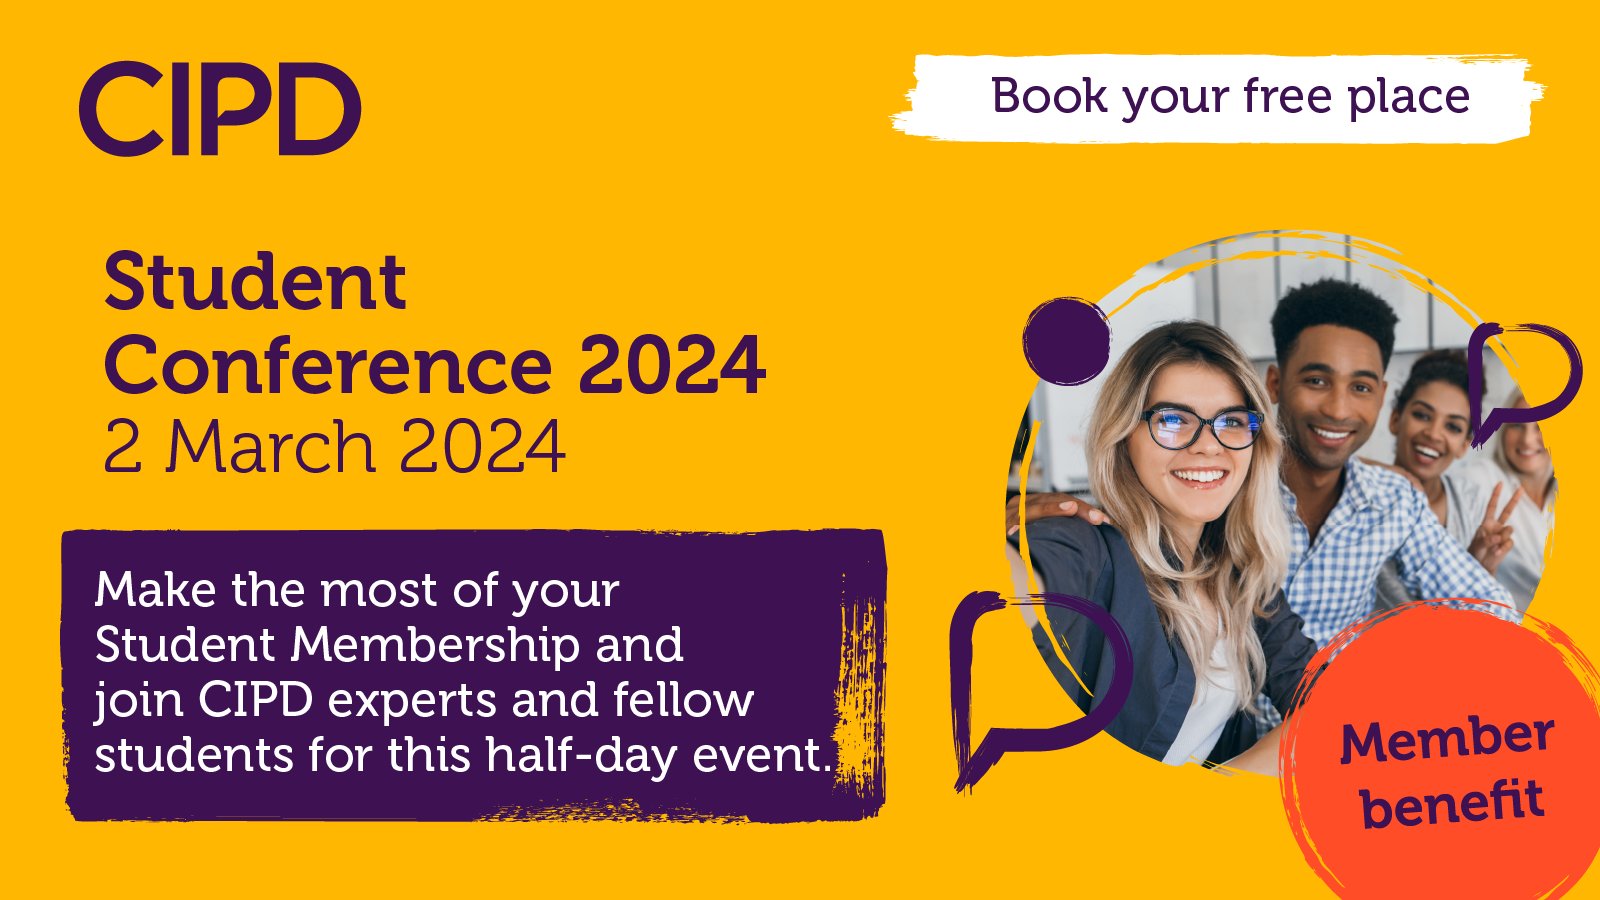 CIPD Student Conference 2 March 2024 and introductions